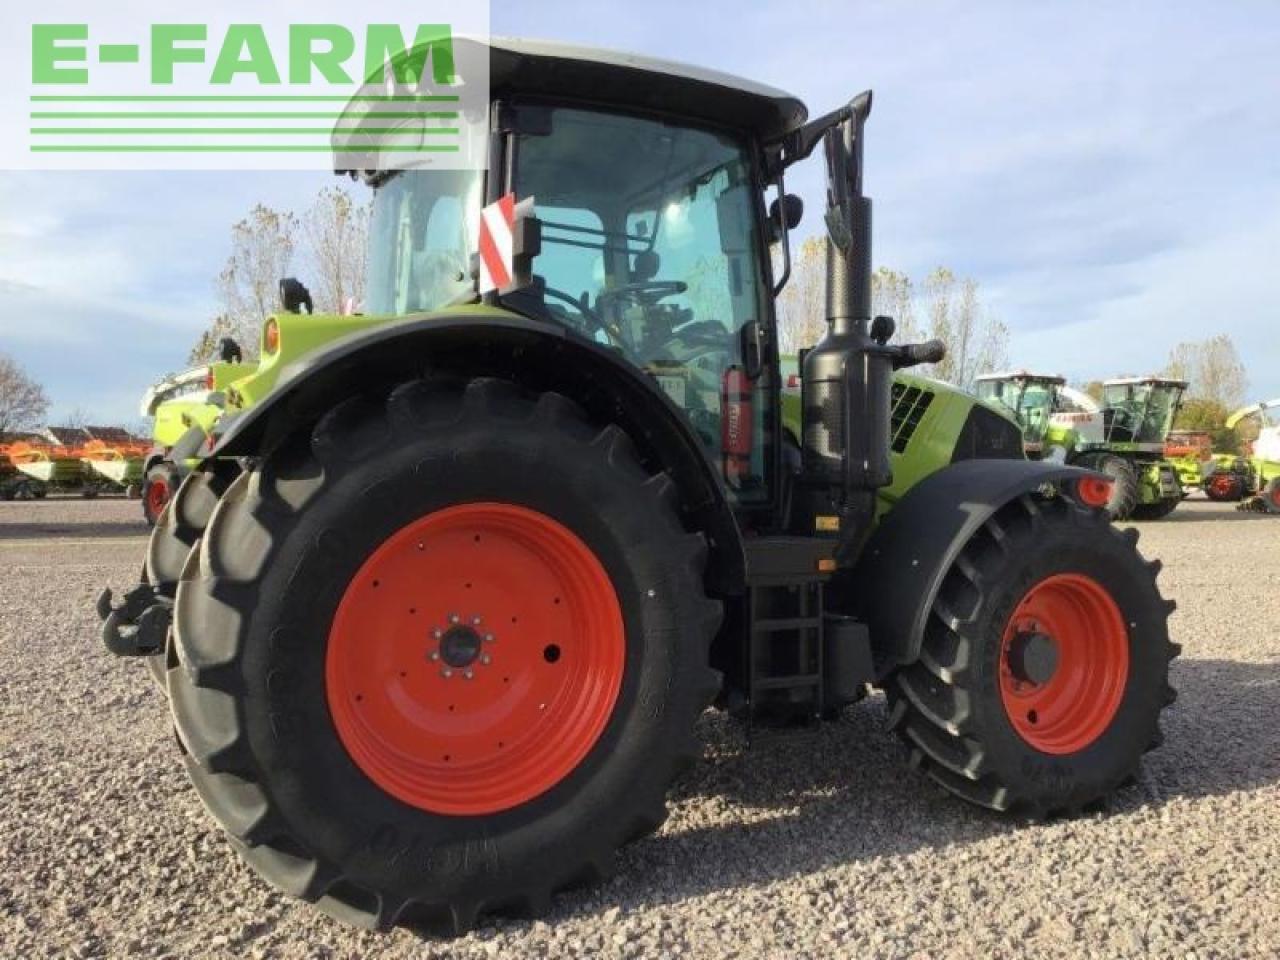 Tractor CLAAS arion 530 stage v